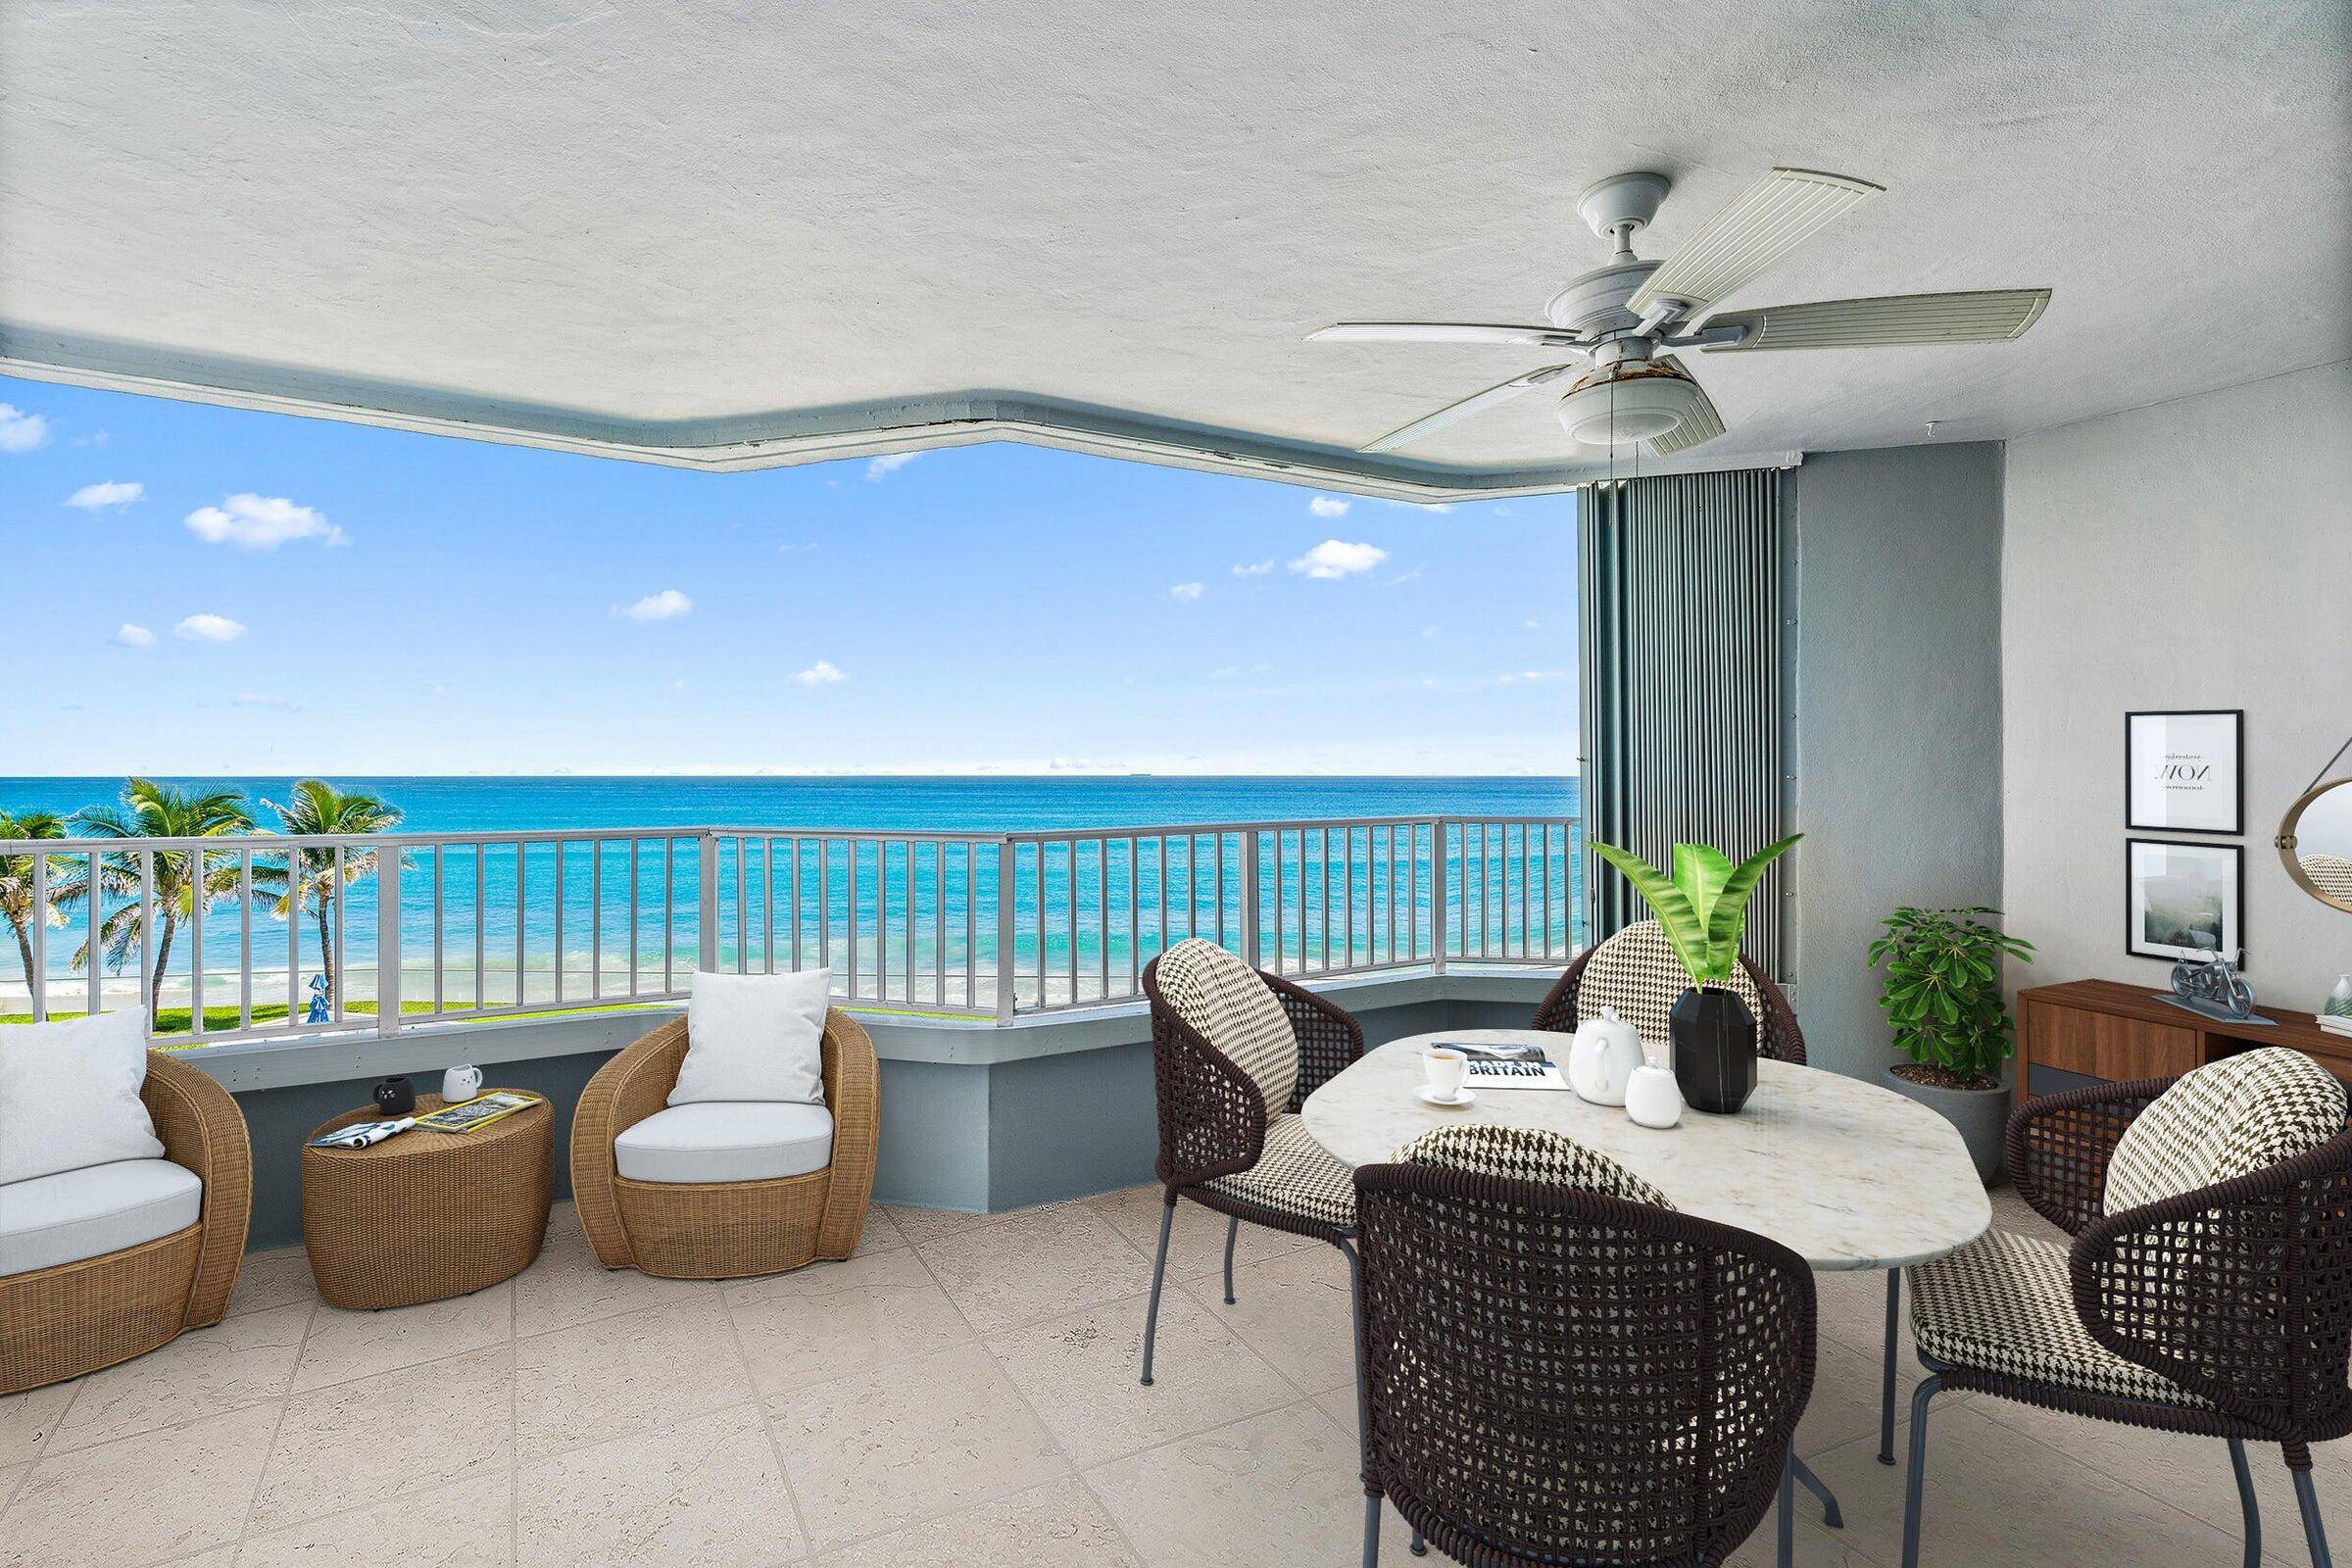 Direct oceanfront 3 bedroom, 3 bath residence with unobstructed ocean and Intracoastal views.